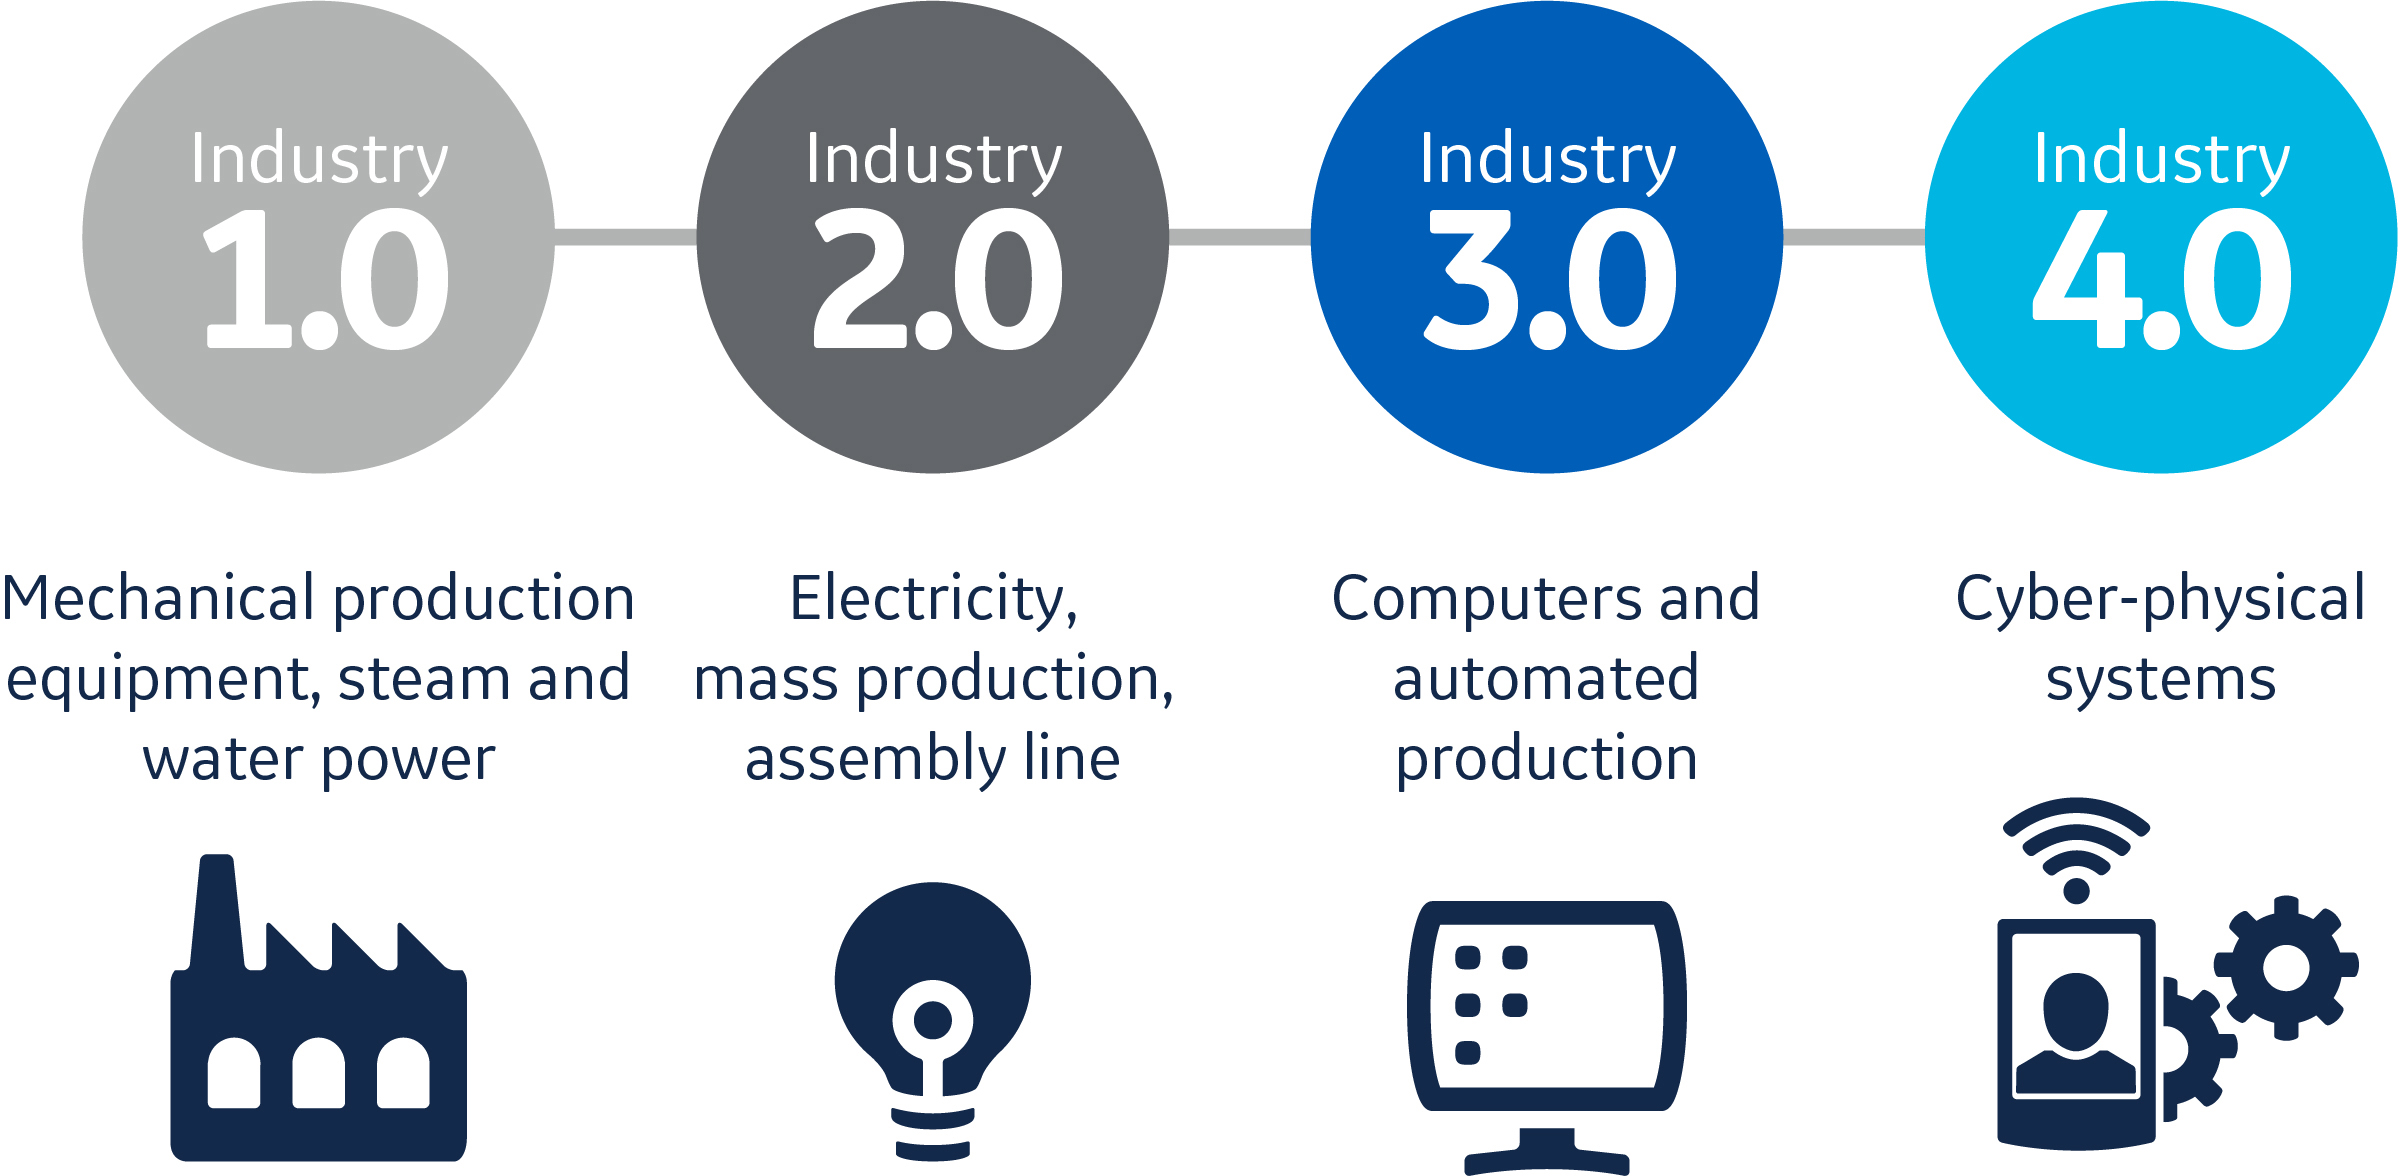 Evolution of industry to Industry 4.0